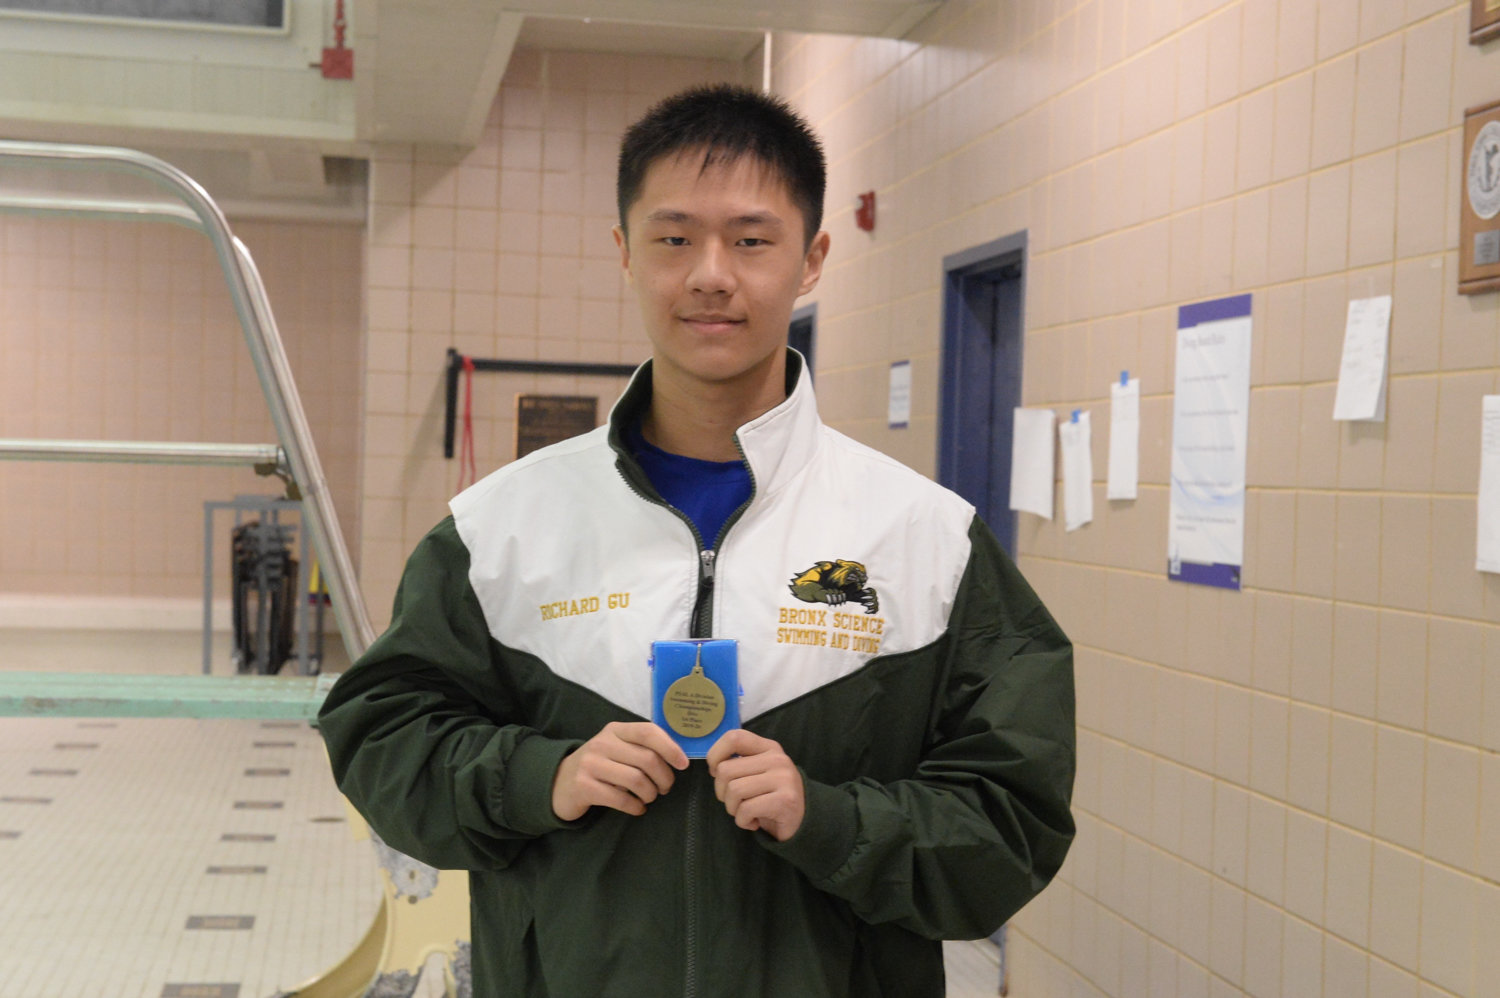 Bronx Science diver Richard Gu displays the medal he earned by finishing first in the Public School Athletic League’s city championships this season.